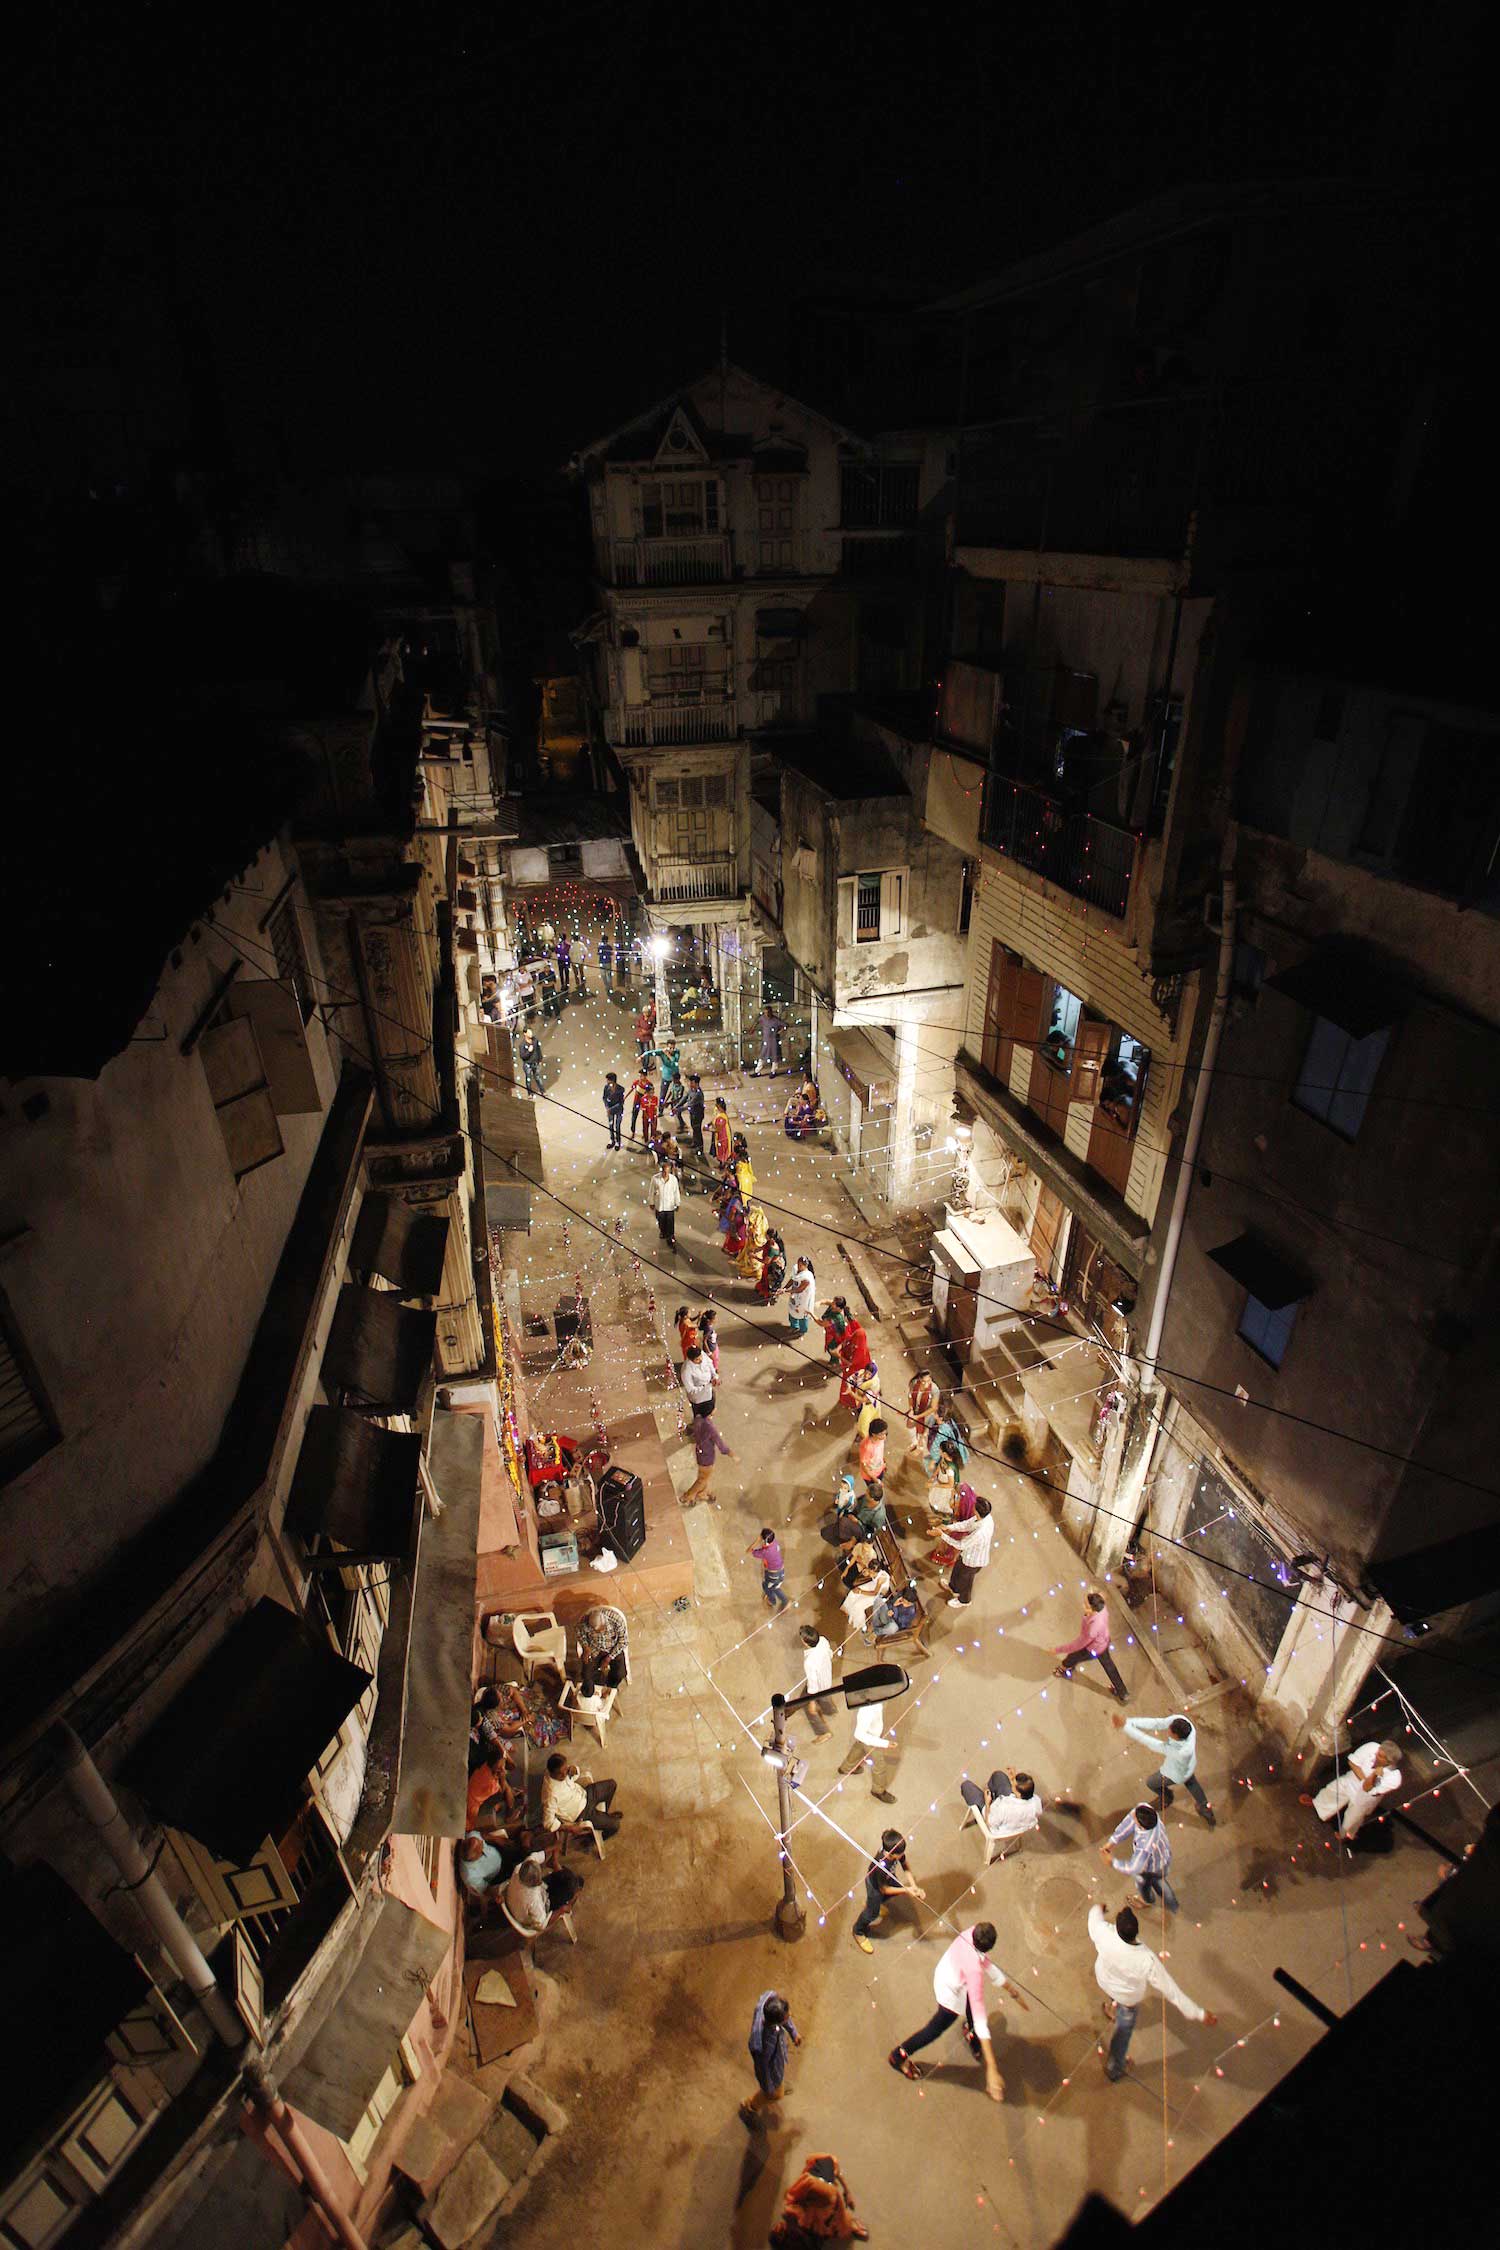 A dance in Ahmedabad, the capital of Gujarat.